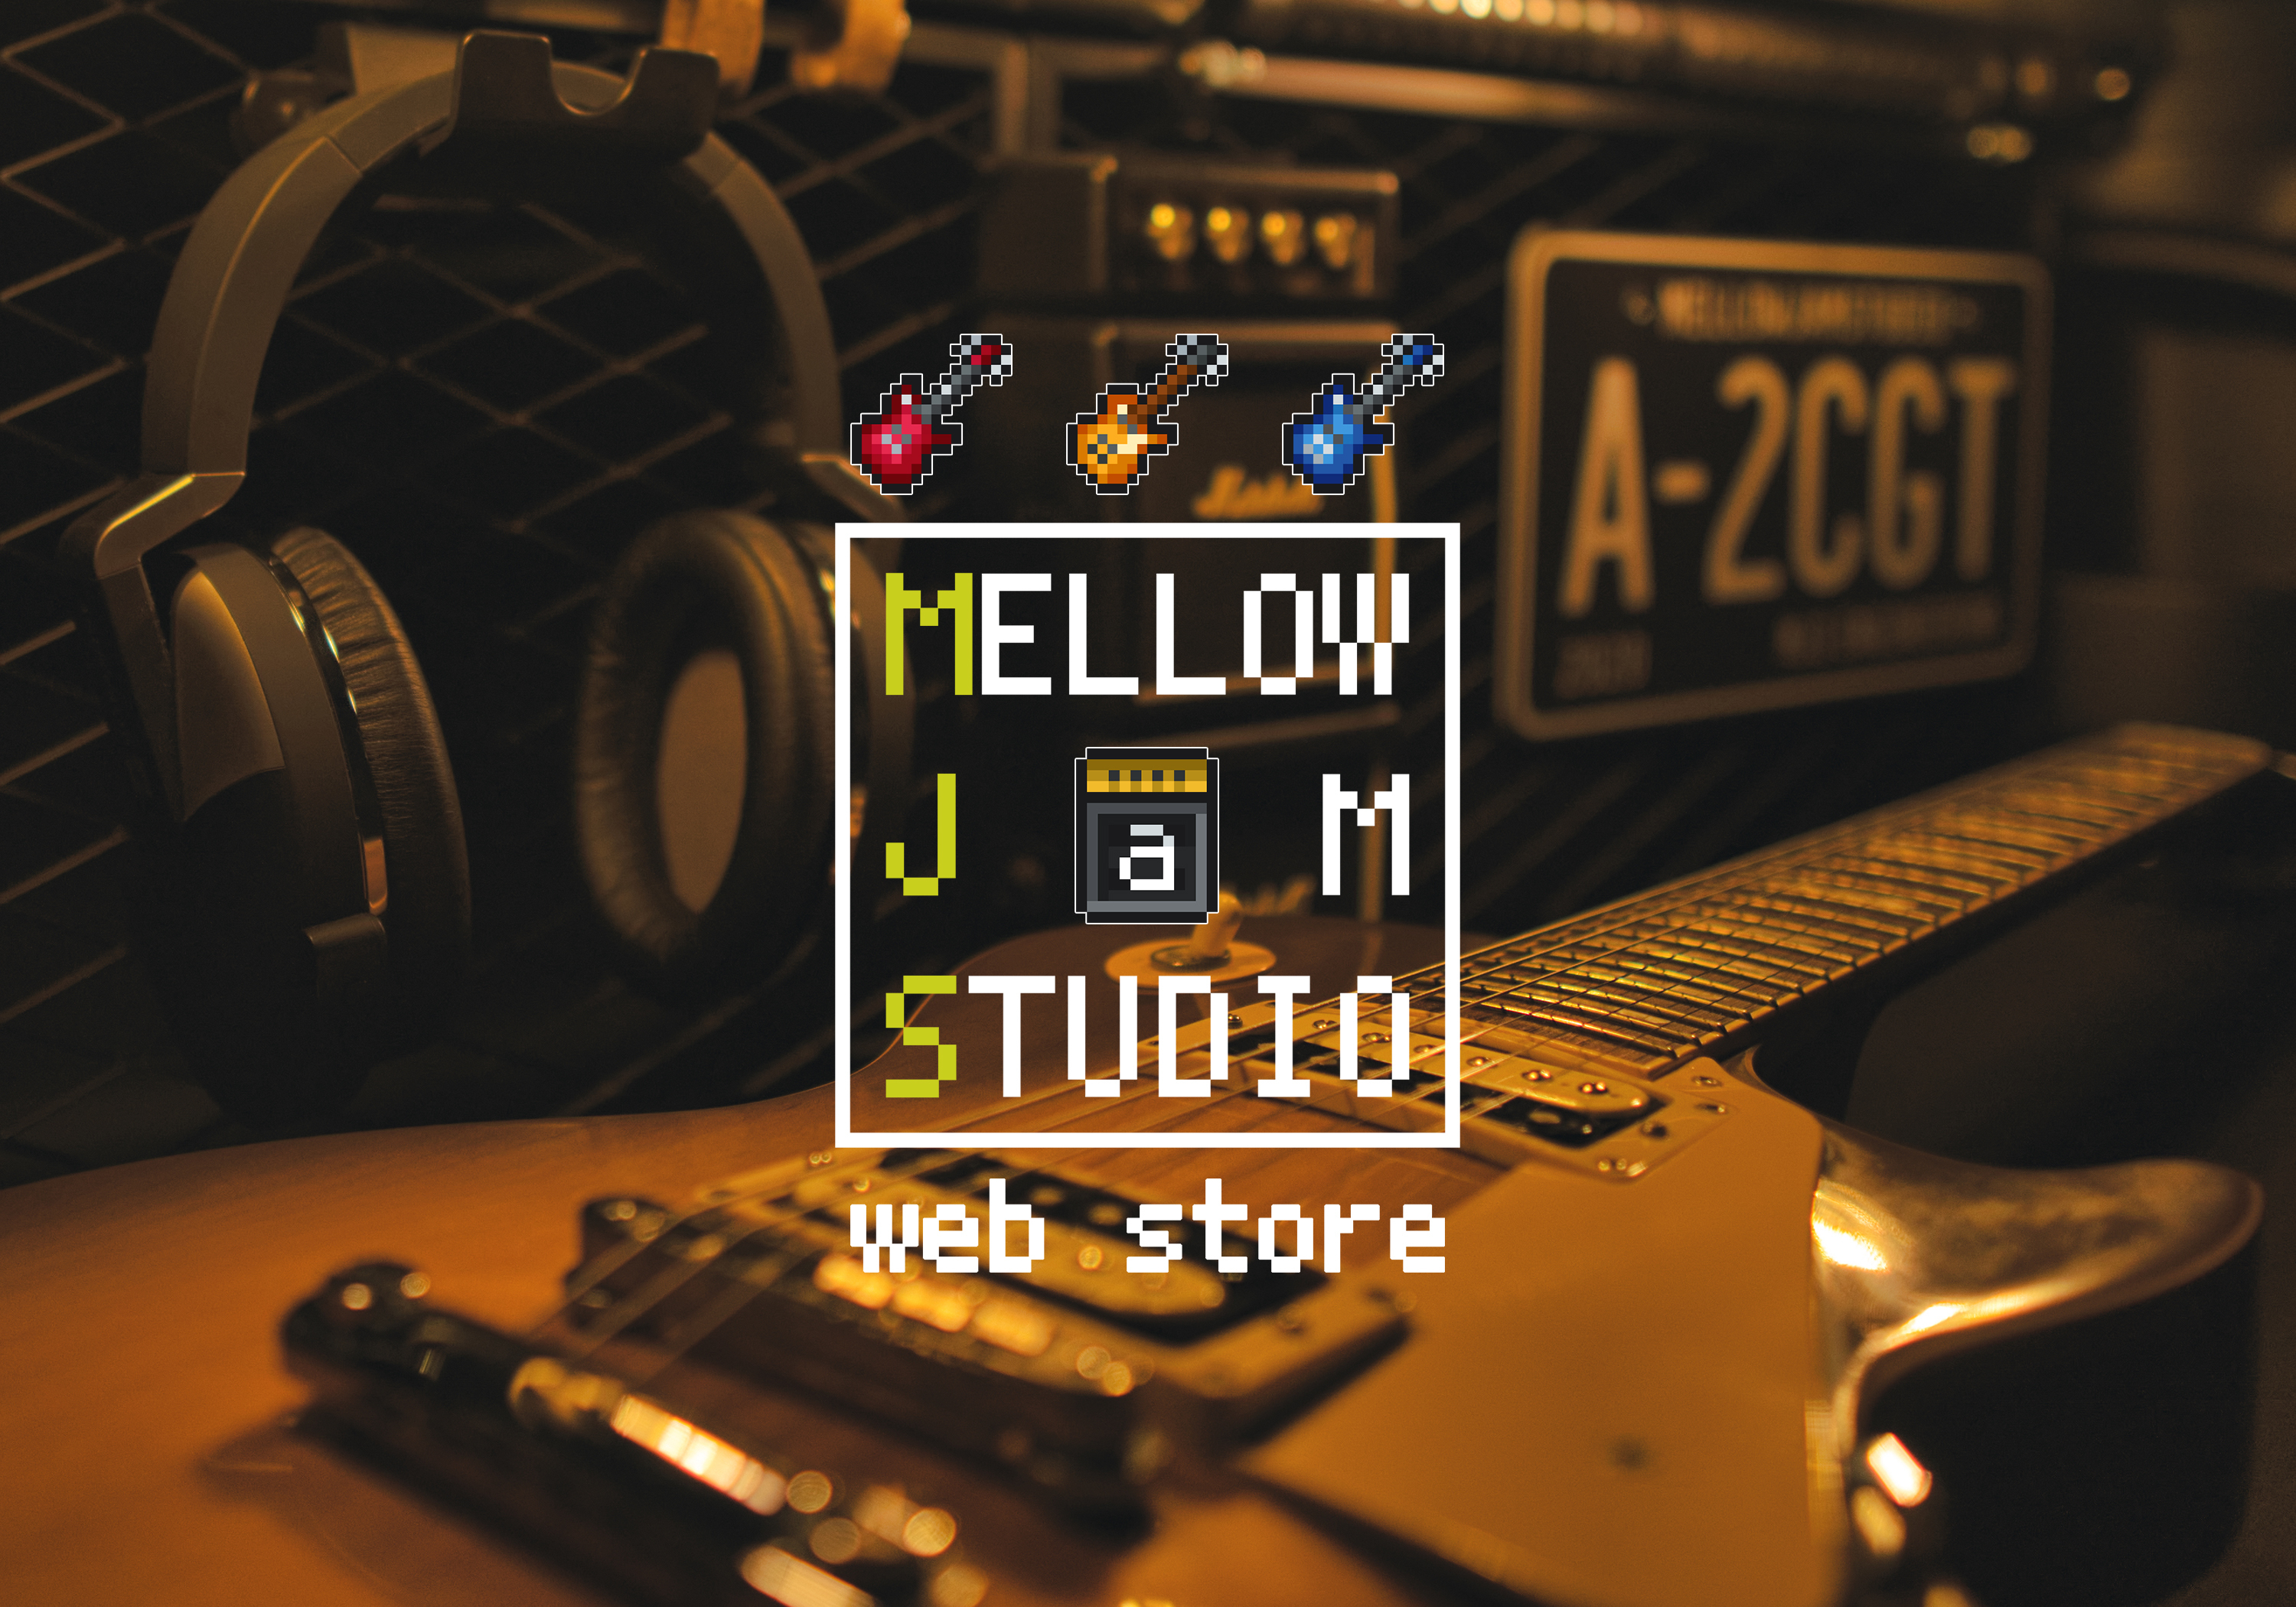 aのどうぐや [MJS web store]